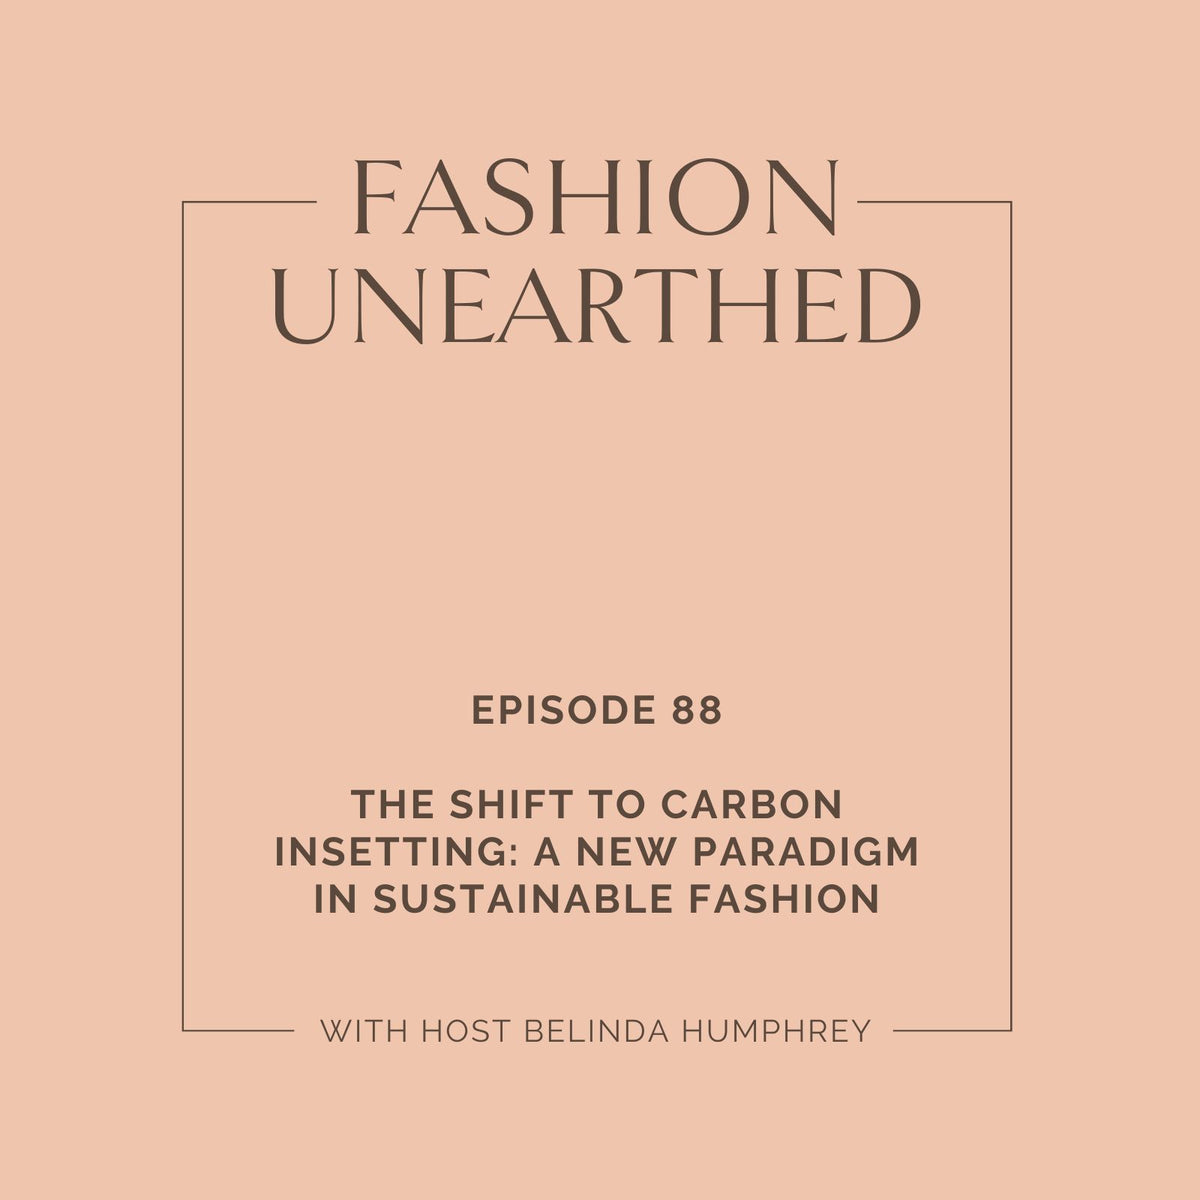 Episode 88: The Shift to Carbon Insetting: A New Paradigm in Sustainable Fashion